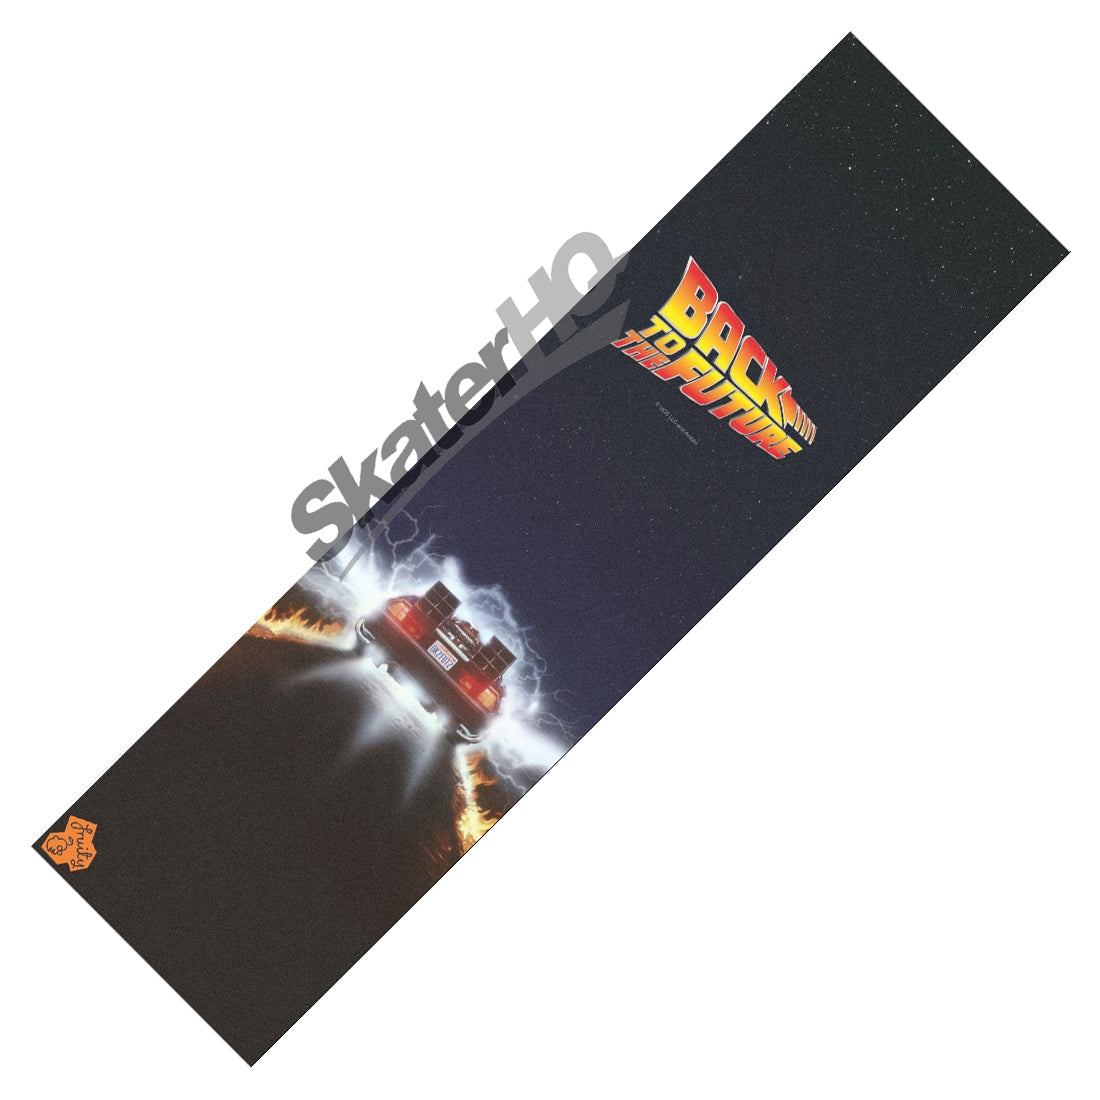 Fruity Collab Griptape - Back To The Future Griptape